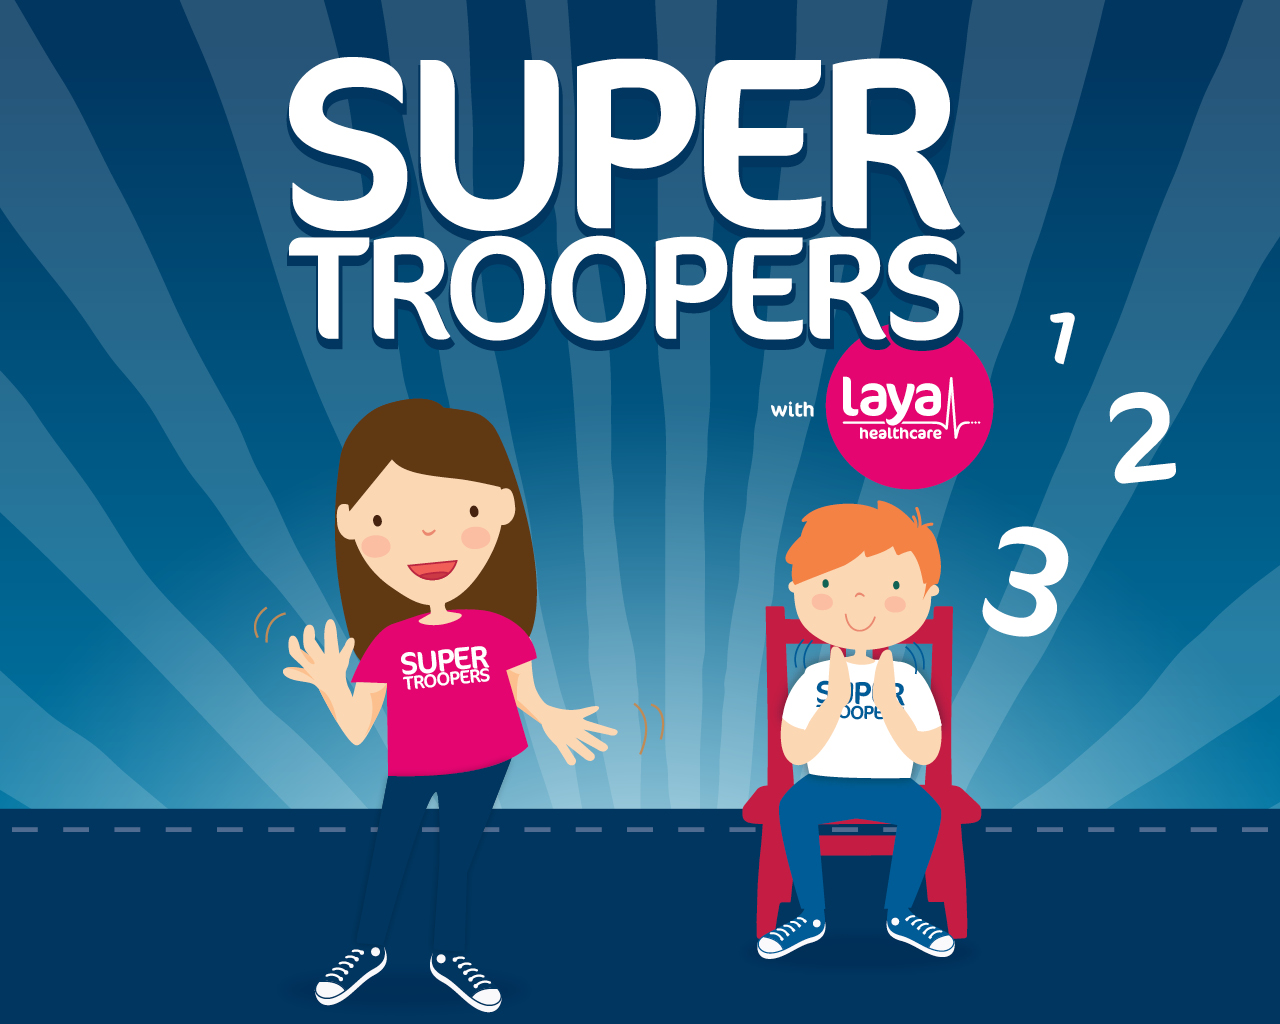 Super Troopers blue cartoon image showing two cartoon children underneath the text 